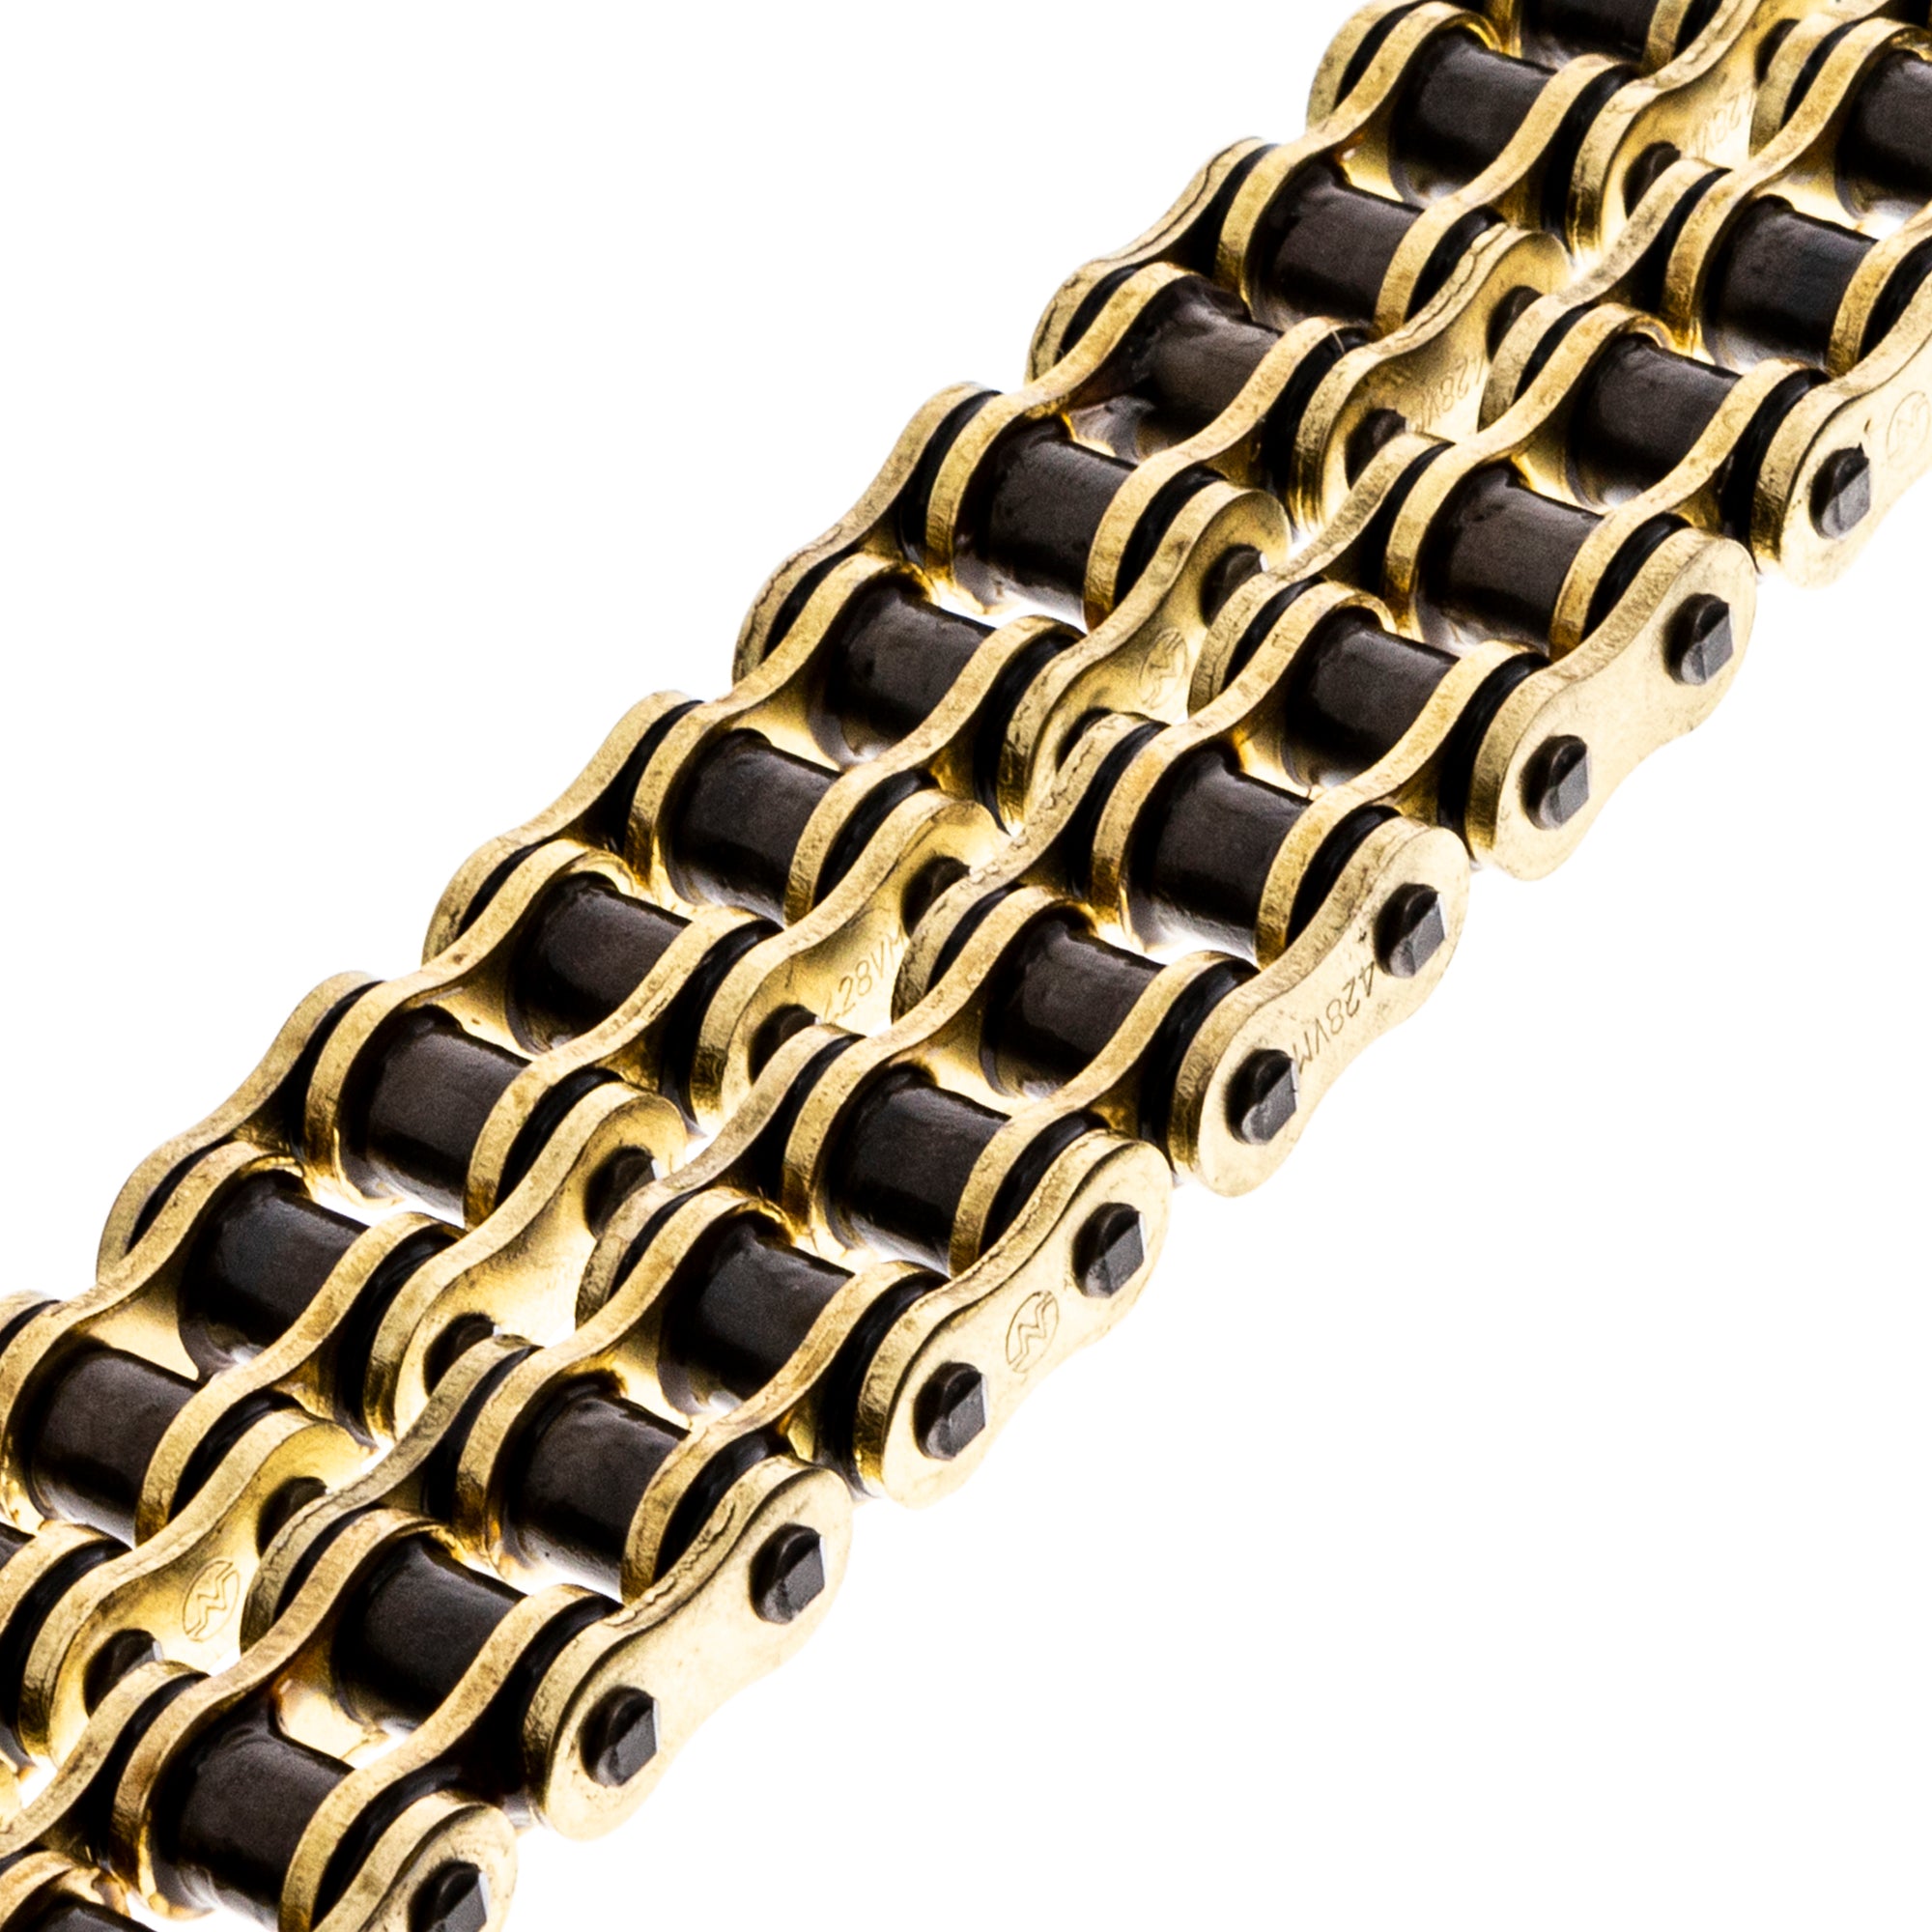 Gold X-Ring Chain 92 w/ Master Link for zOTHER FourTrax ATC125M ATC110 40530-VM6-003 NICHE 519-CDC2579H